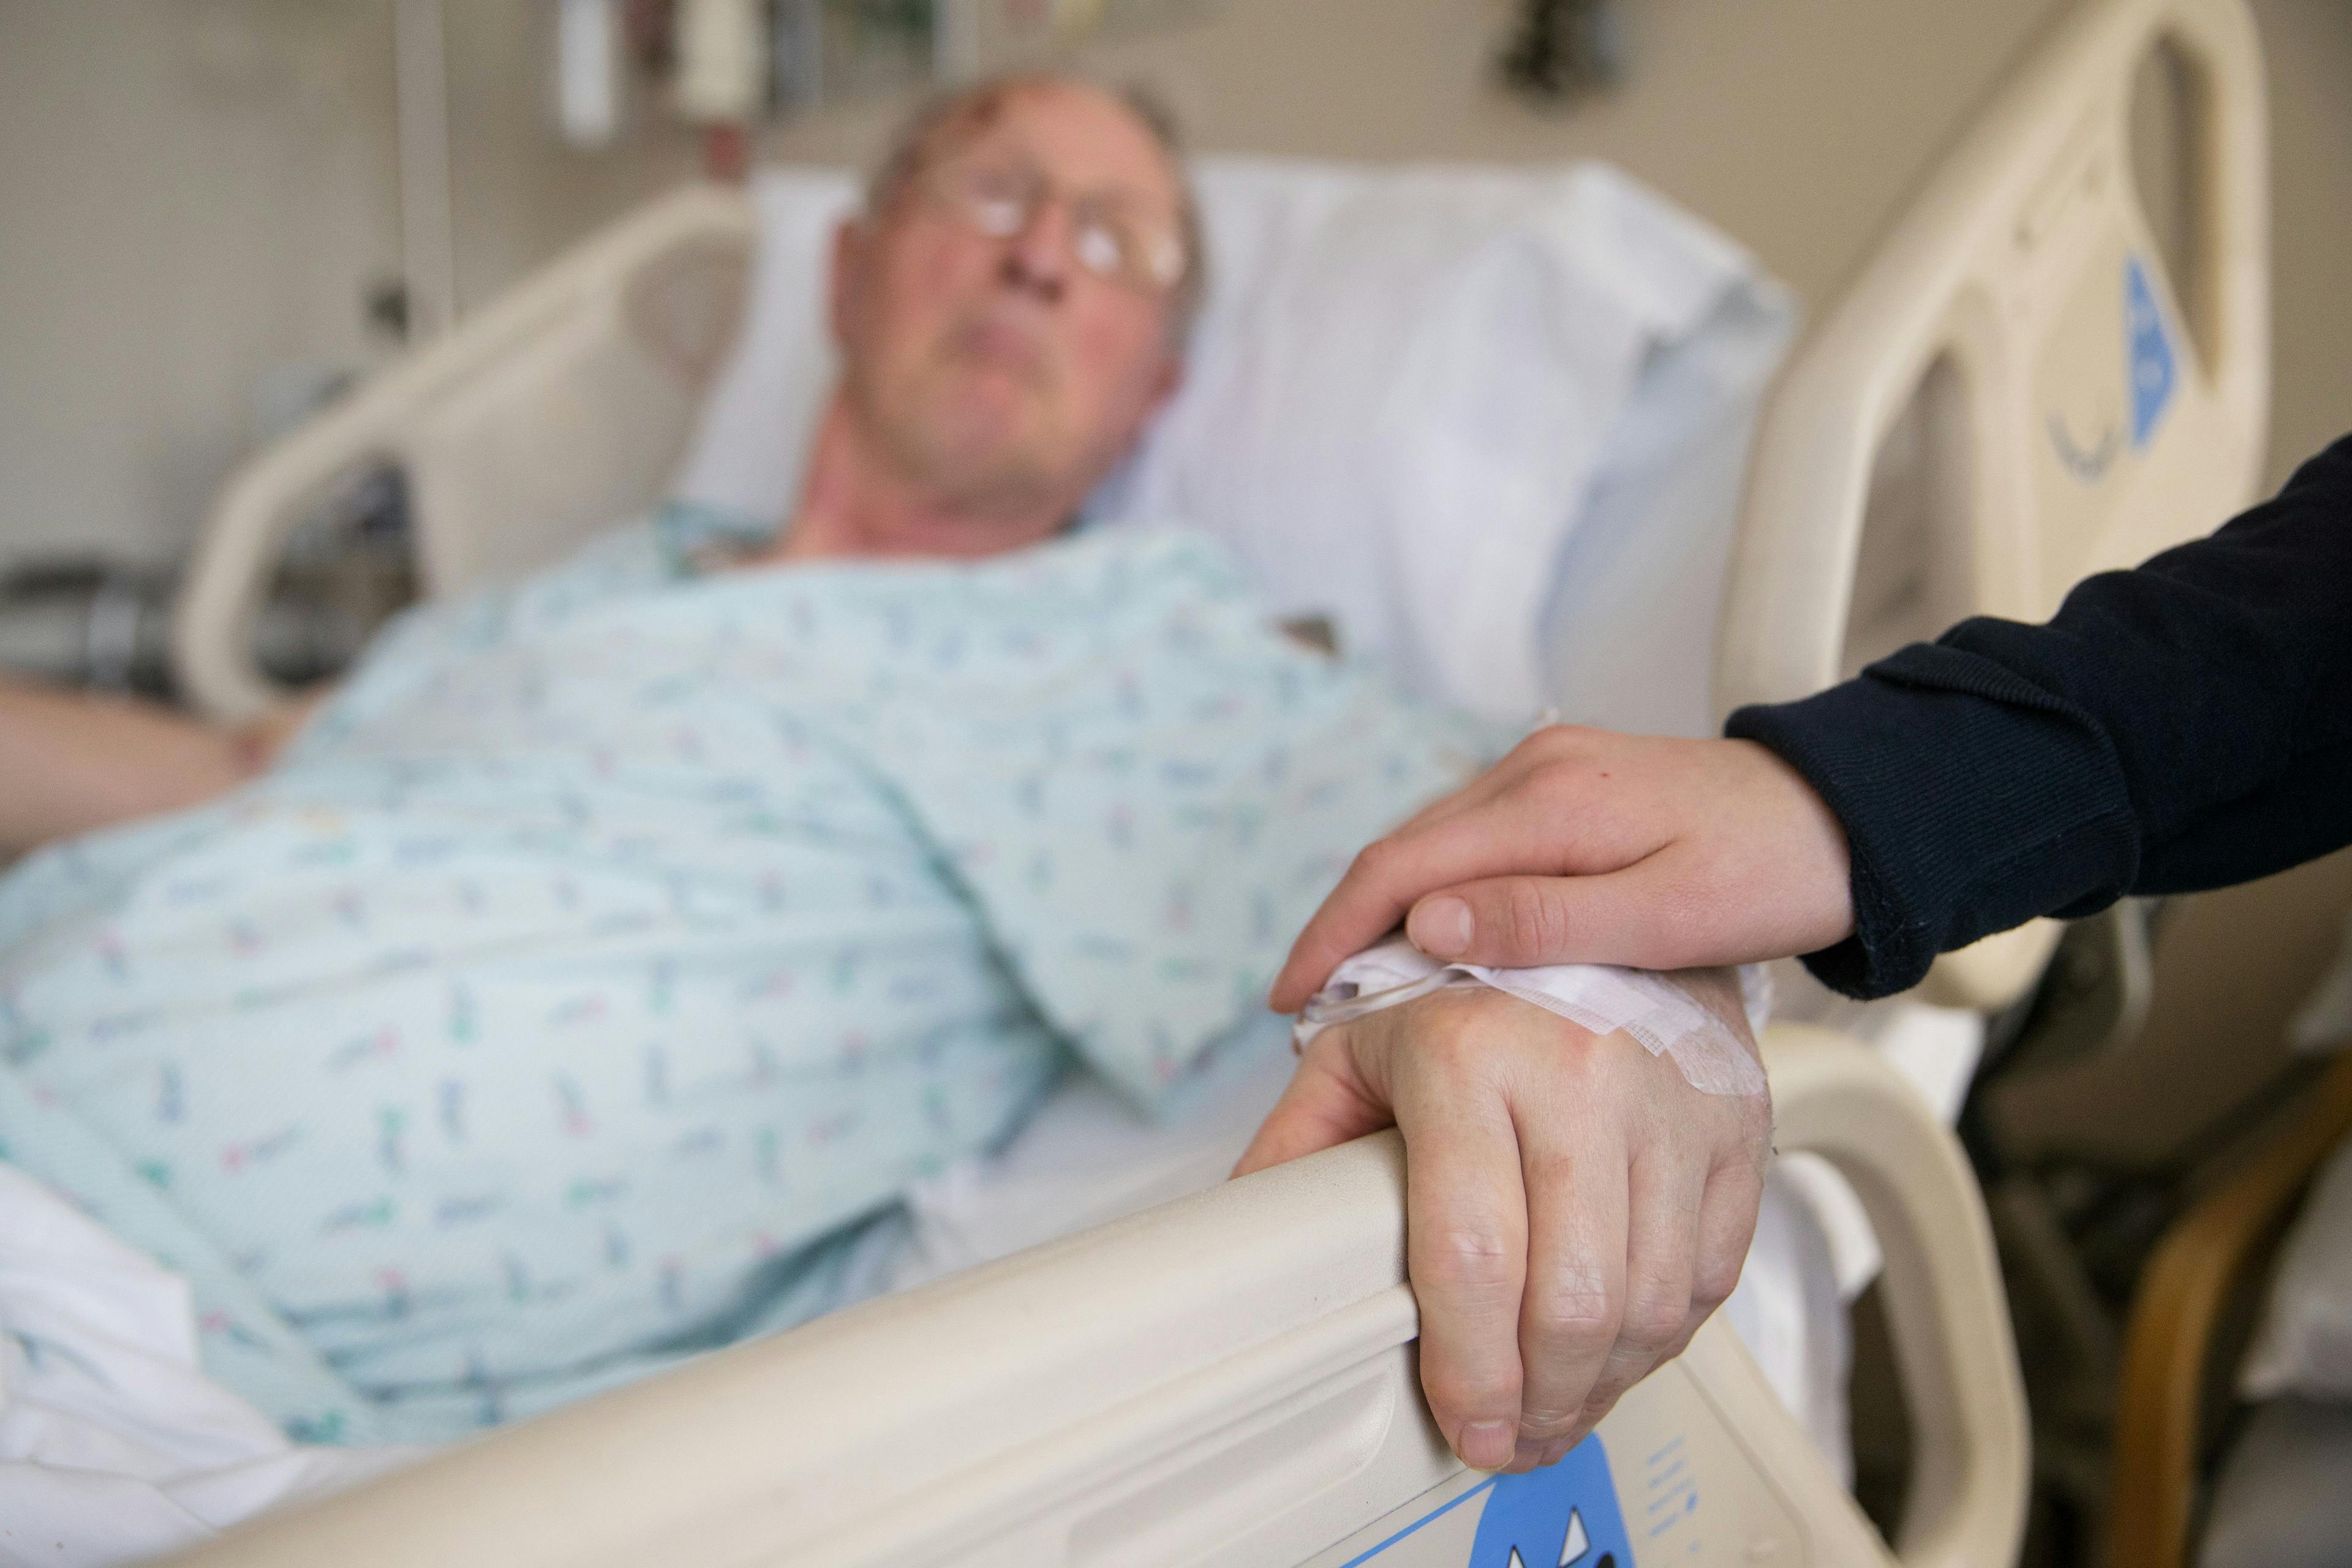 Holding hands with an elderly patient | Image Credit: Mat Hayward - stock.adobe.com